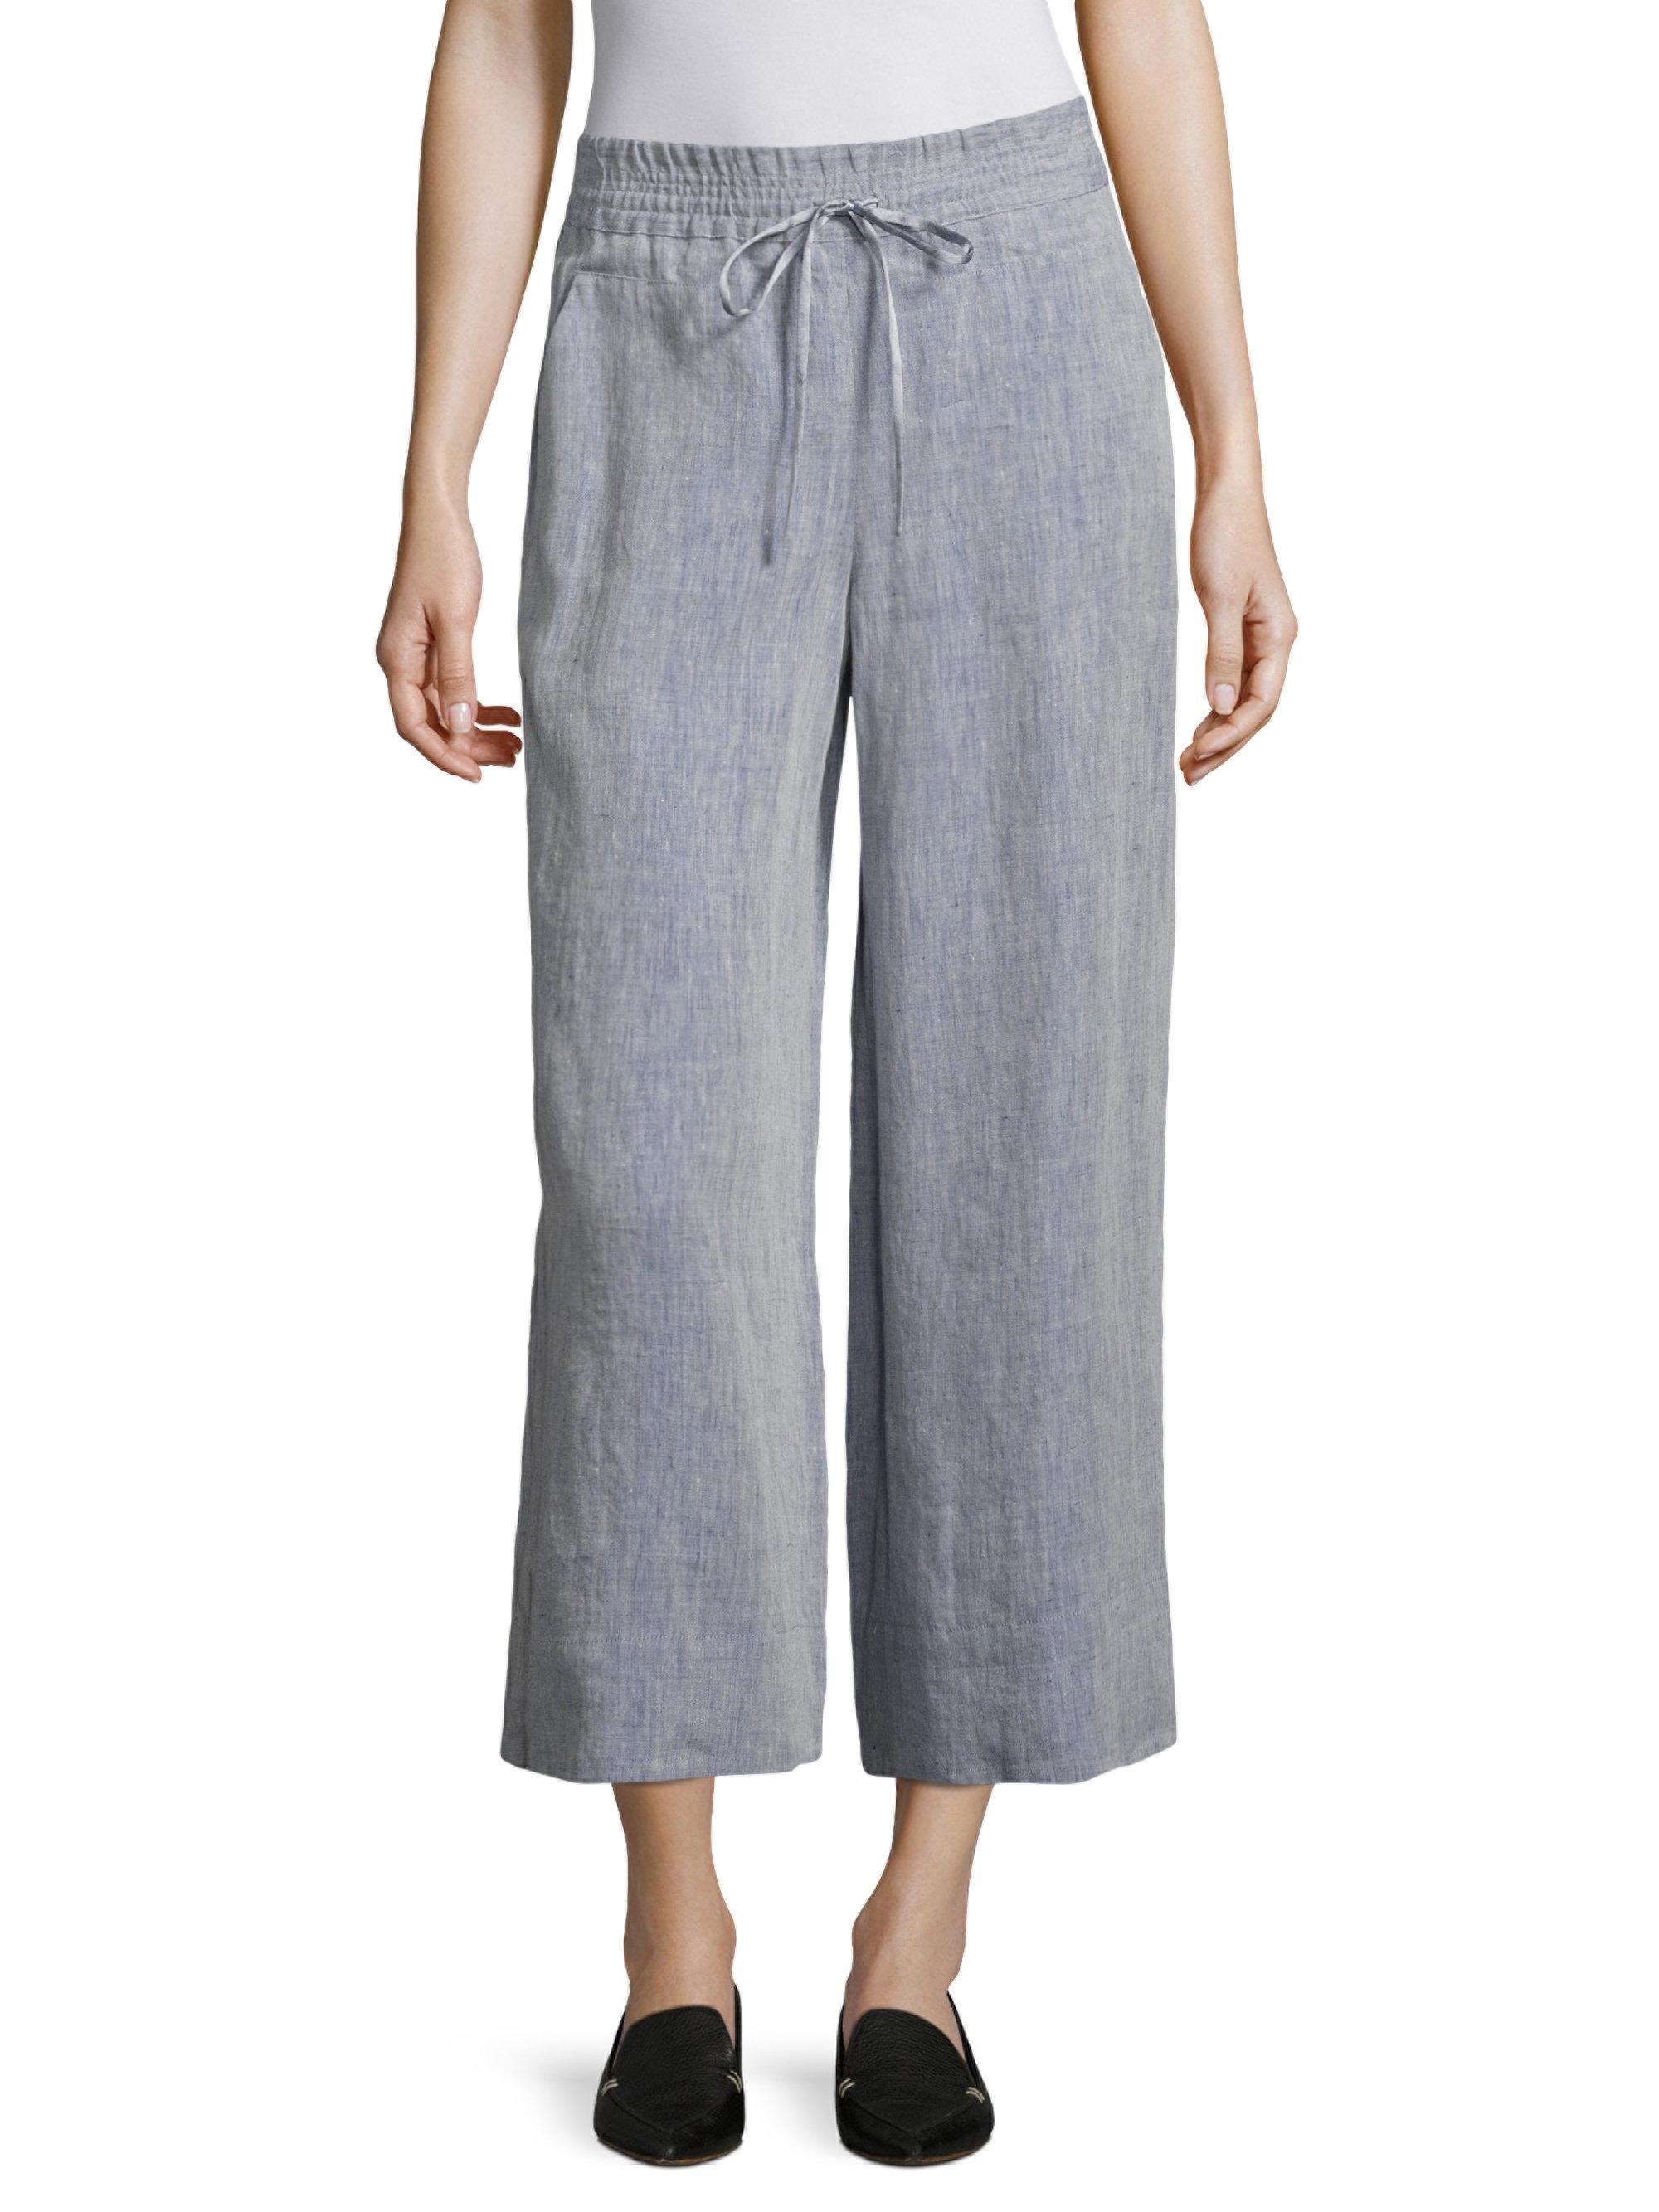 Lafayette 148 New York Cropped Linen Drawstring Pants in Gray - Lyst